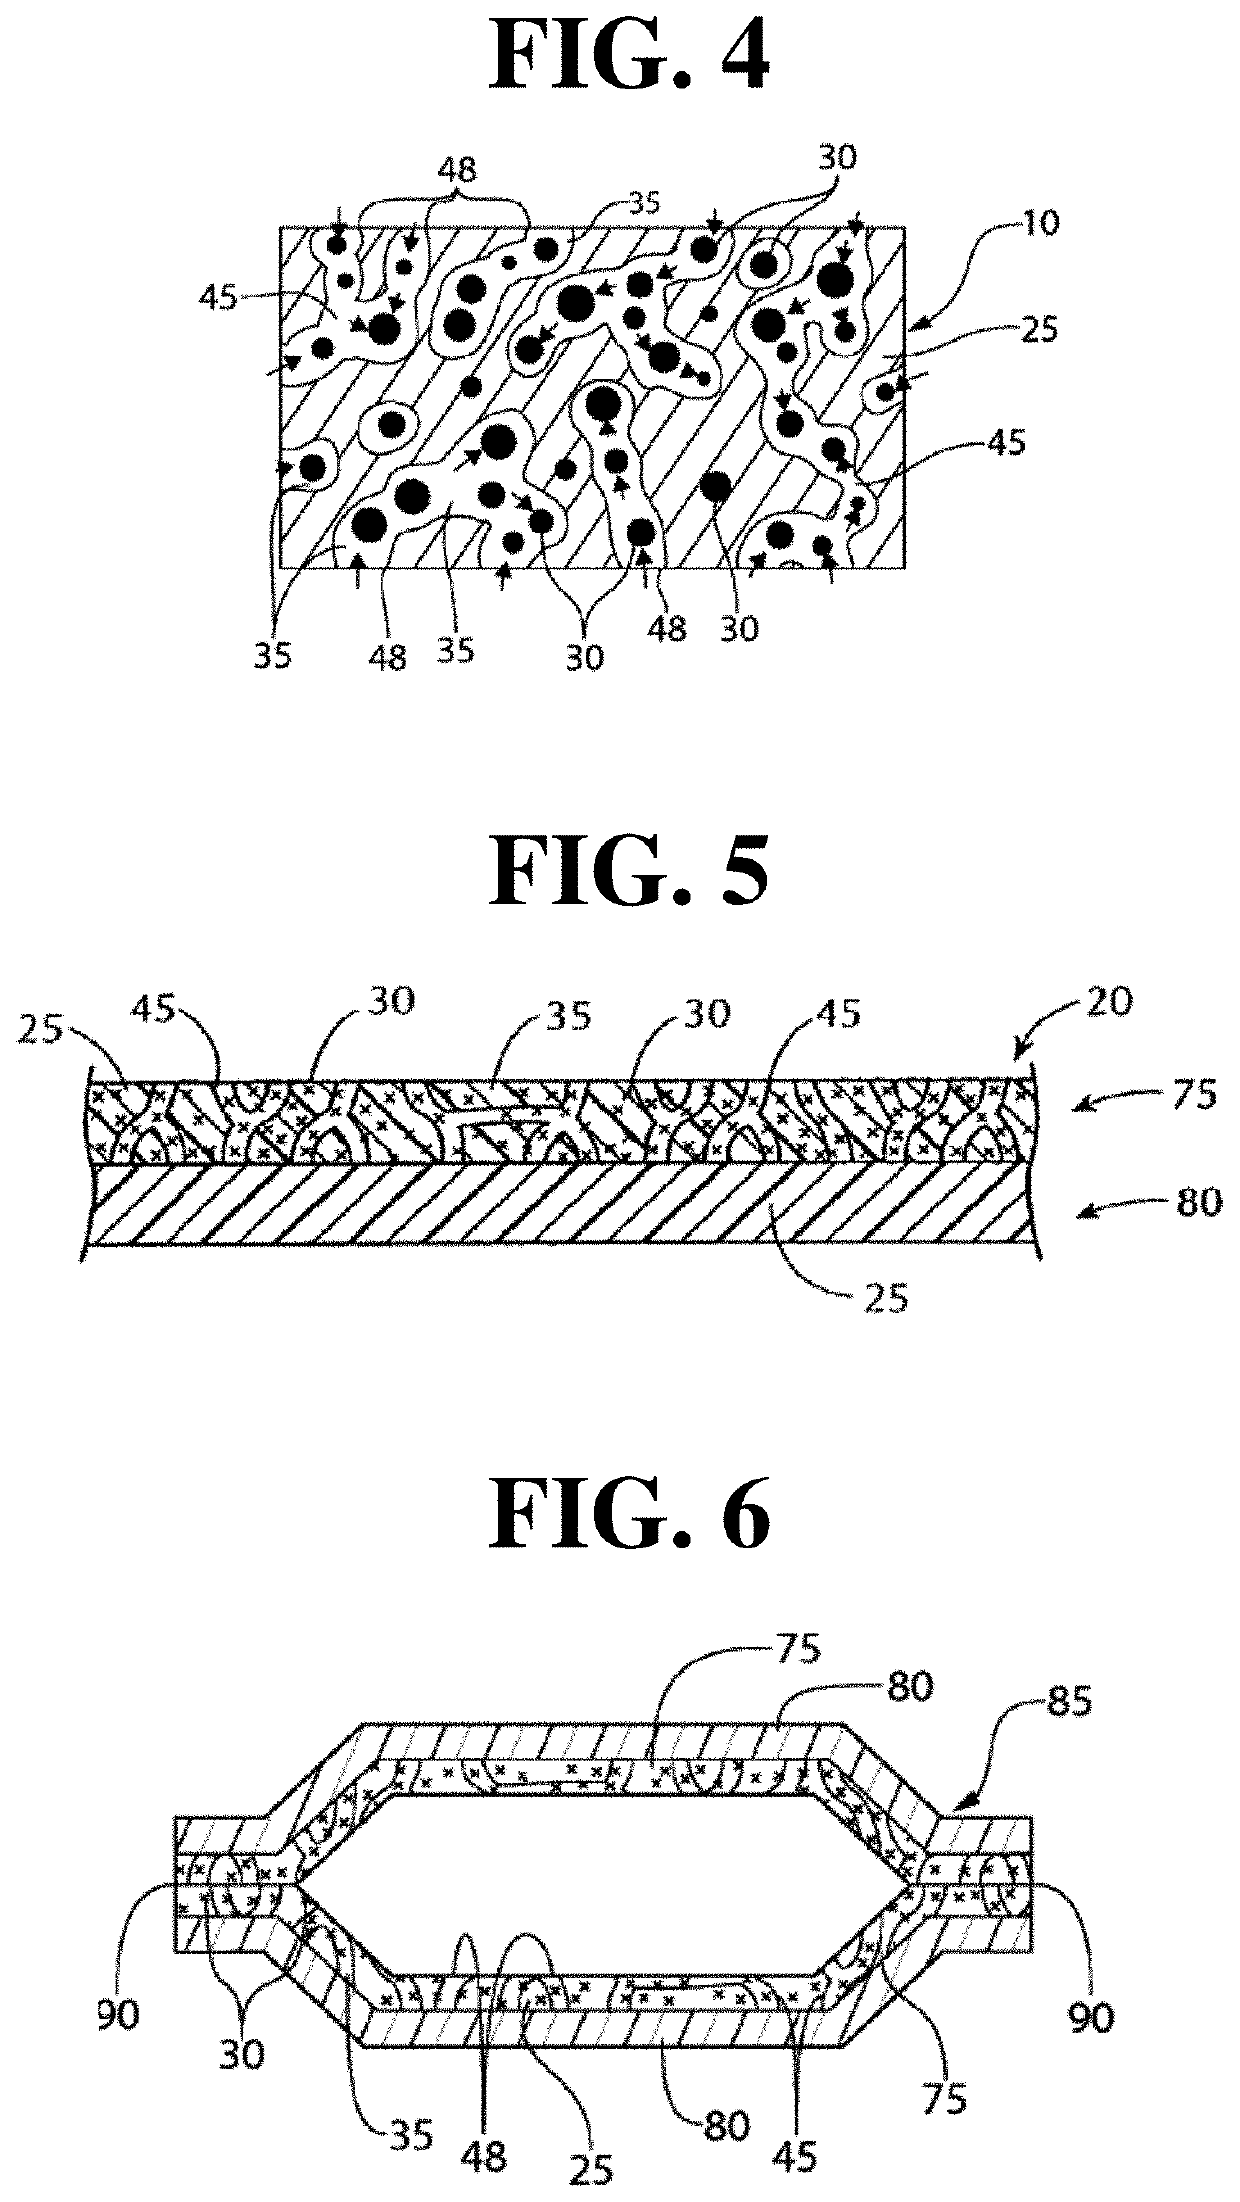 Antimicrobial gas releasing agents and systems and methods for using the same